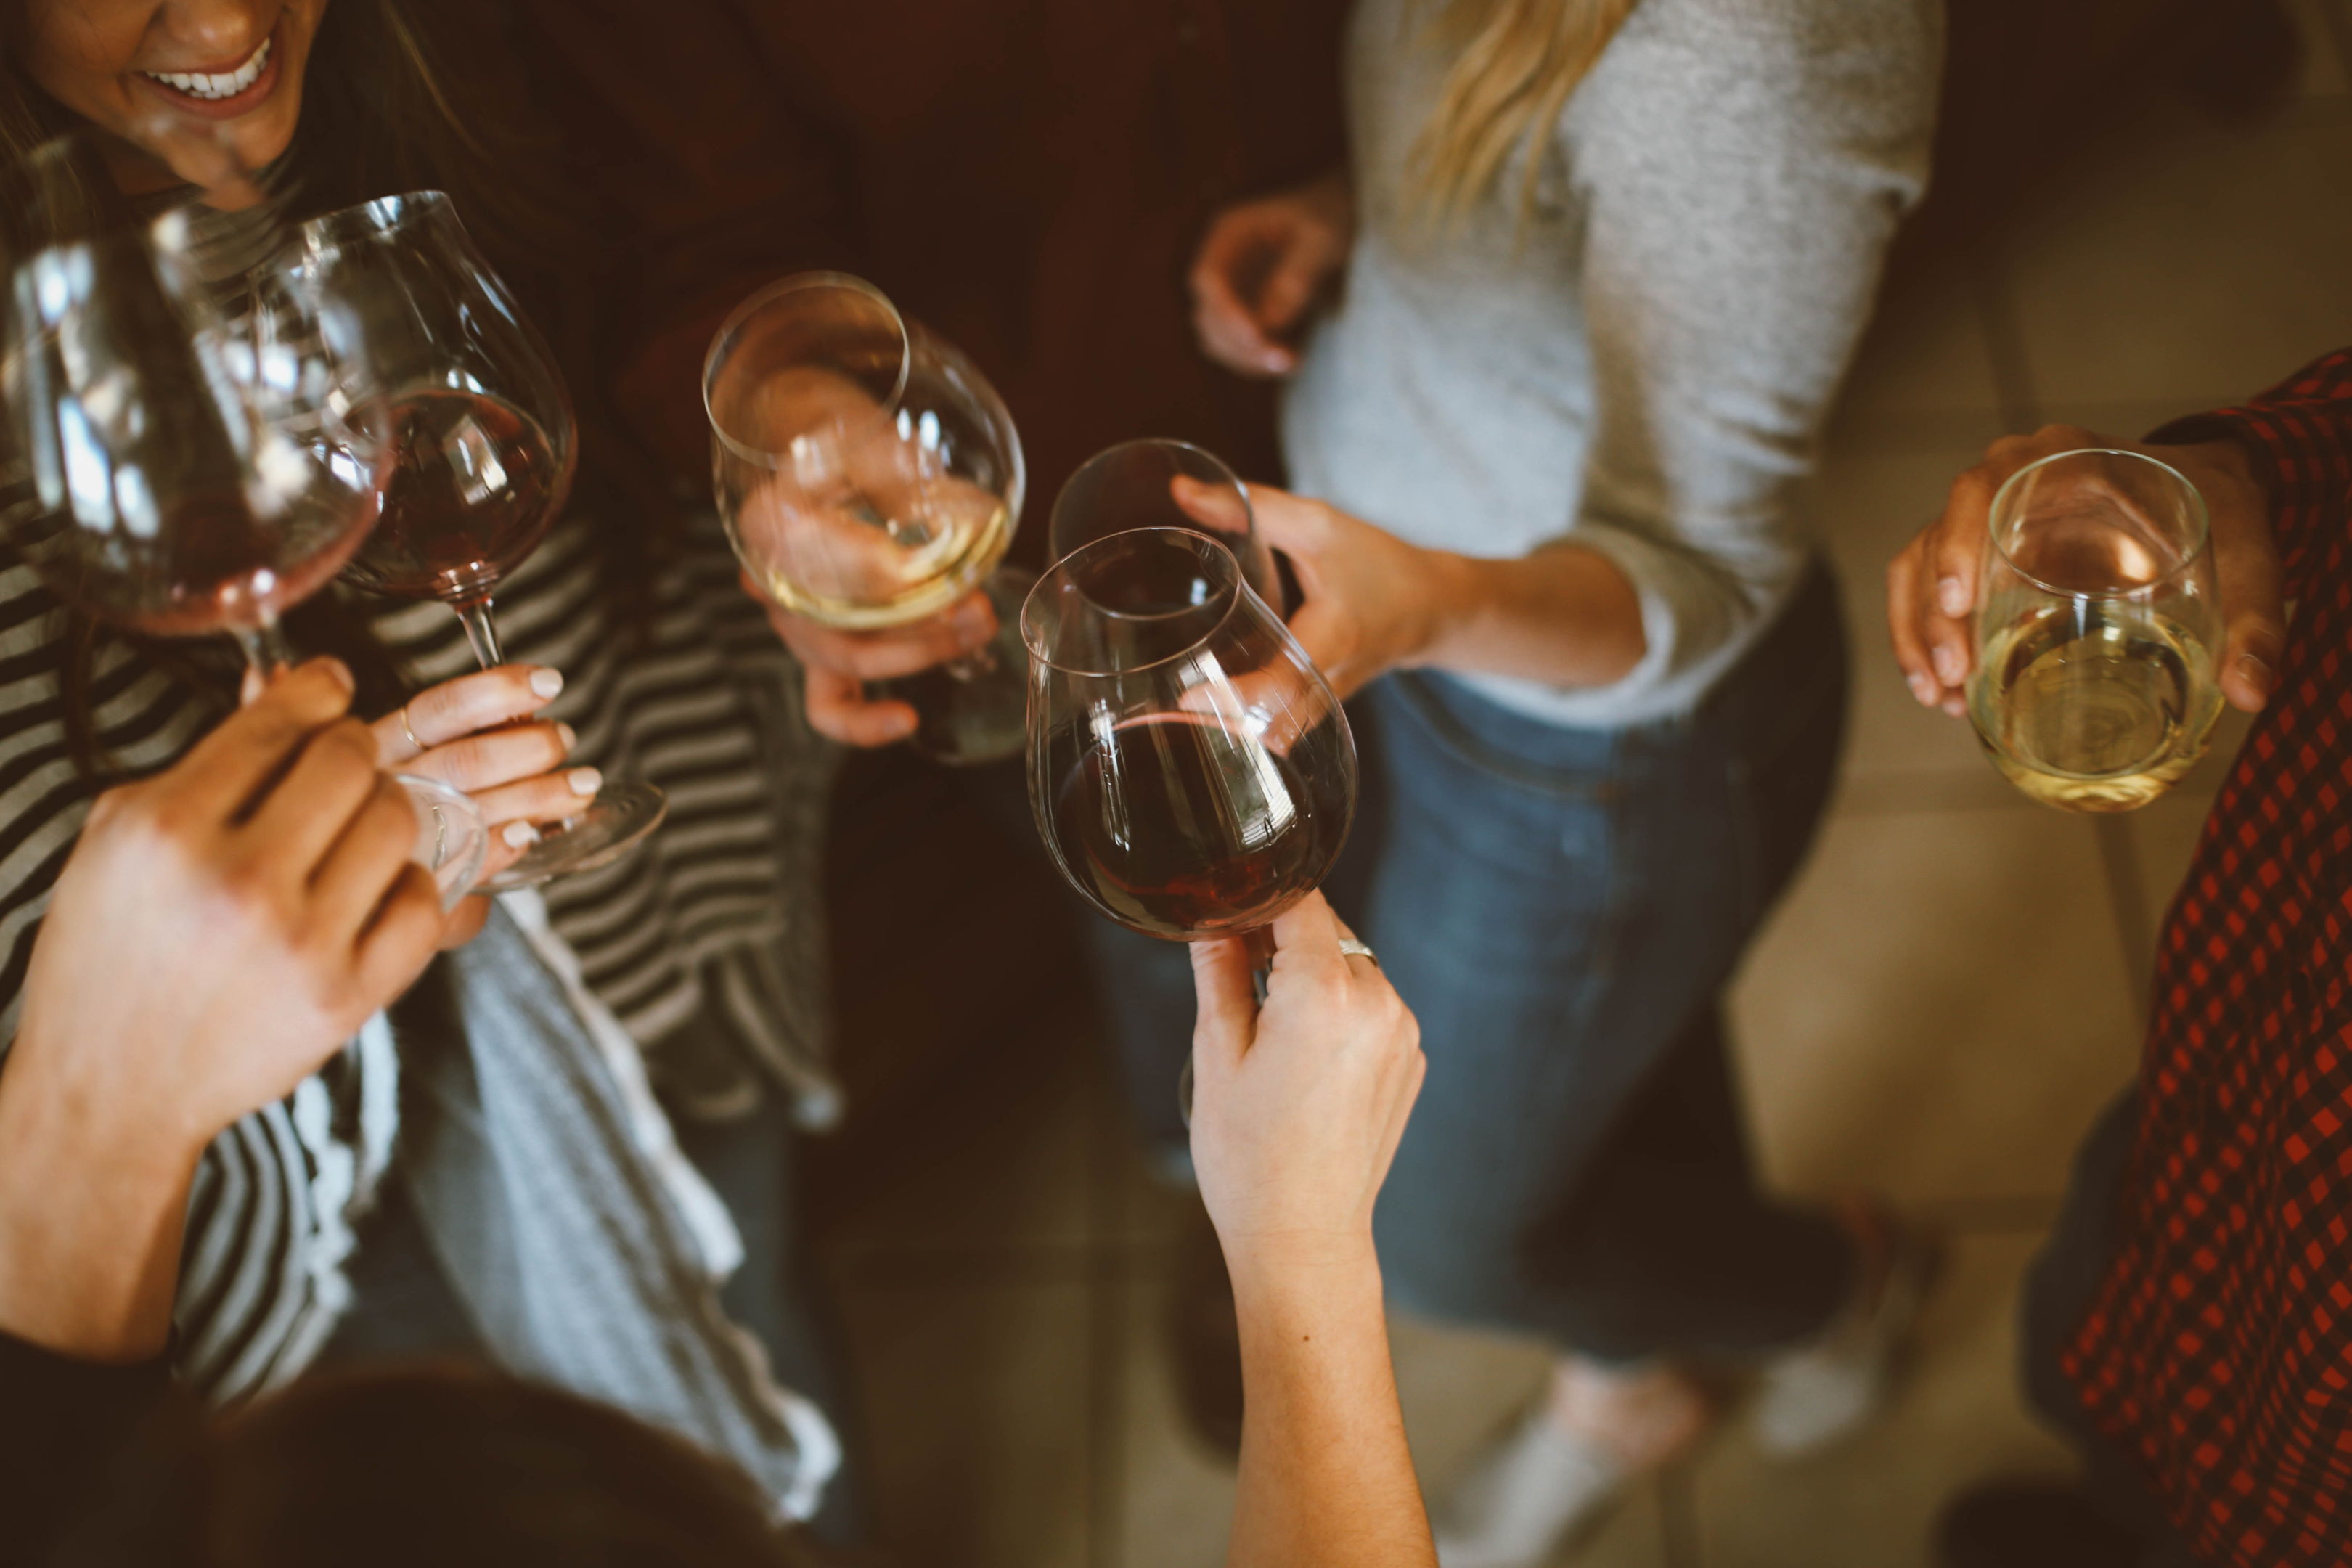 ALT: Group photo of people tossing wine glass. | IMG LINK: https://images.unsplash.com/photo-1519671482749-fd09be7ccebf?ixlib=rb-1.2.1&ixid=MnwxMjA3fDB8MHxwaG90by1wYWdlfHx8fGVufDB8fHx8&auto=format&fit=crop&w=870&q=80